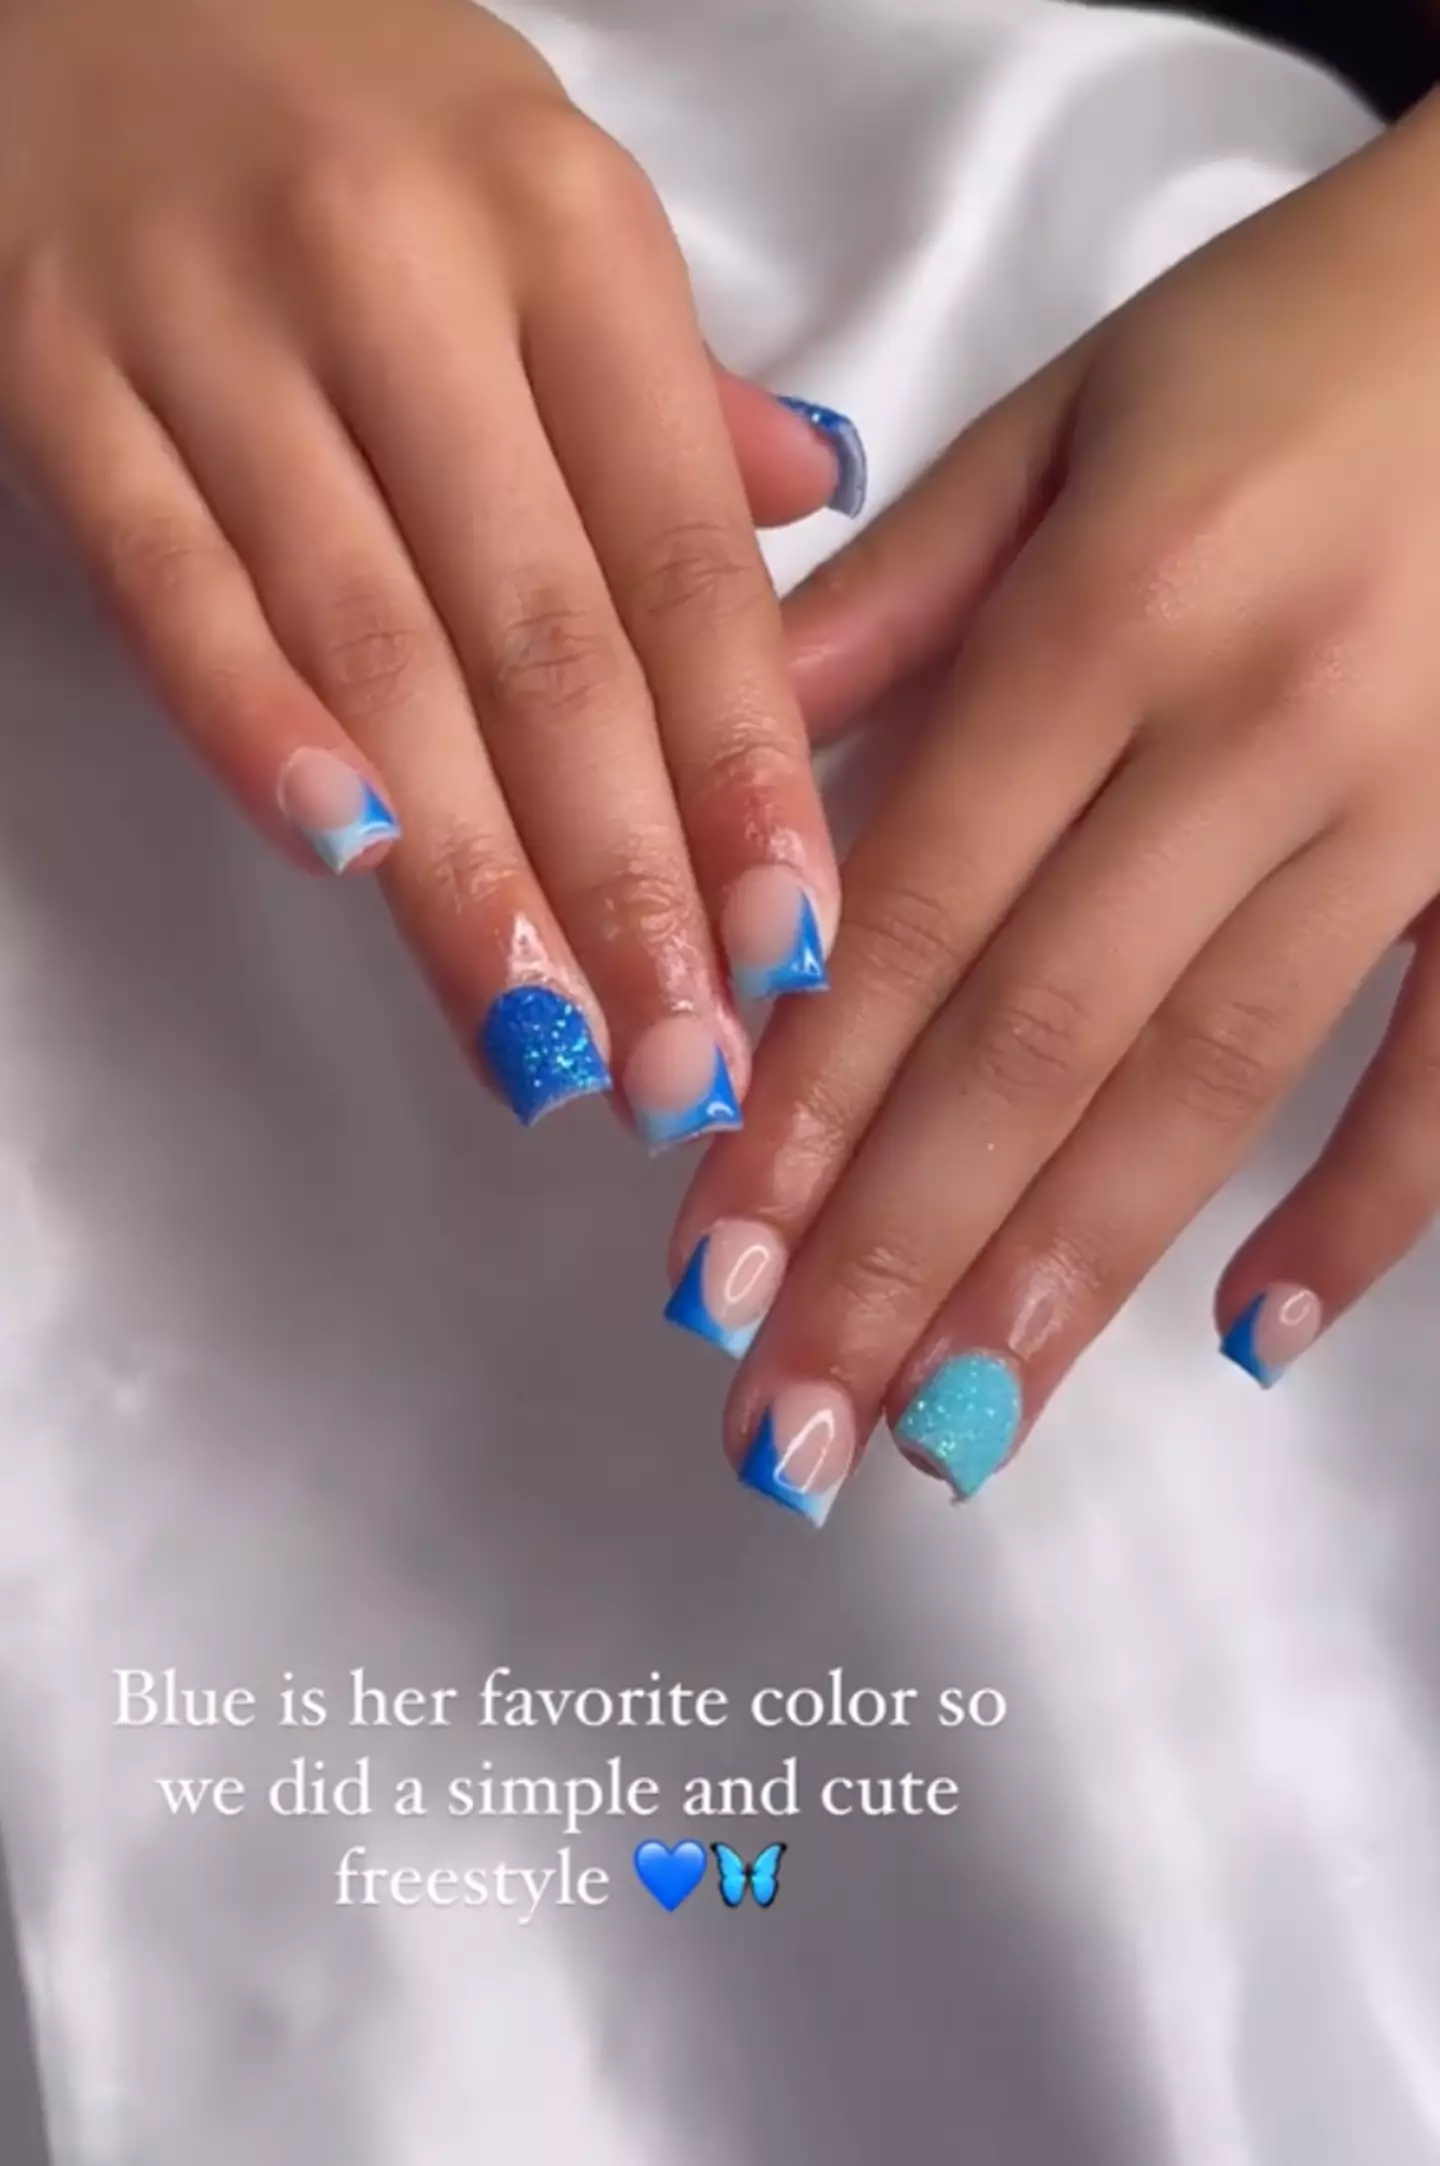 Many people praised the talented mum's 'pretty and age-appropriate' nail design.